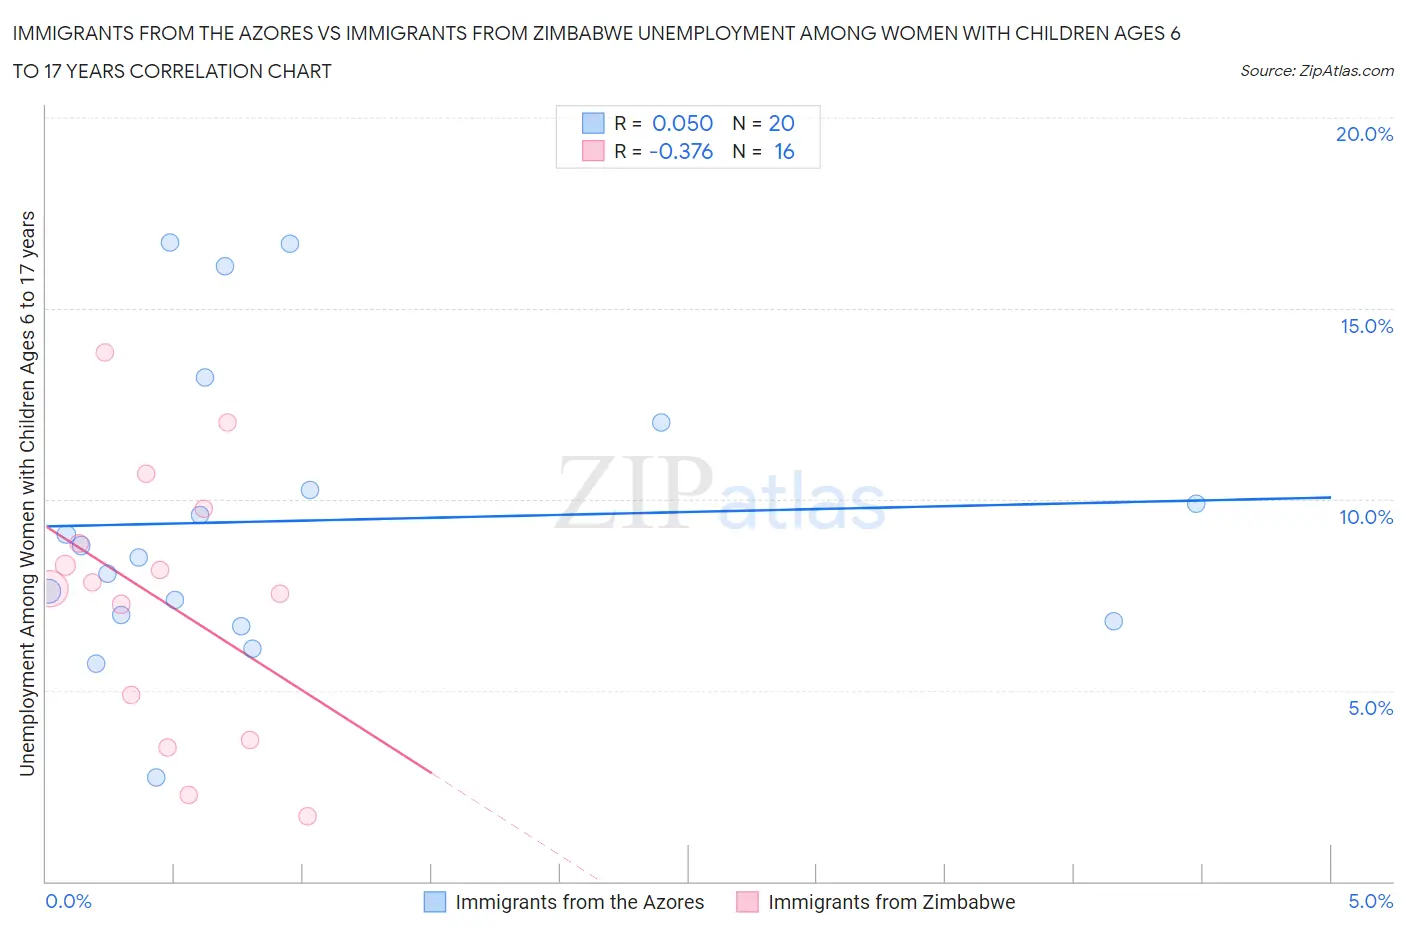 Immigrants from the Azores vs Immigrants from Zimbabwe Unemployment Among Women with Children Ages 6 to 17 years